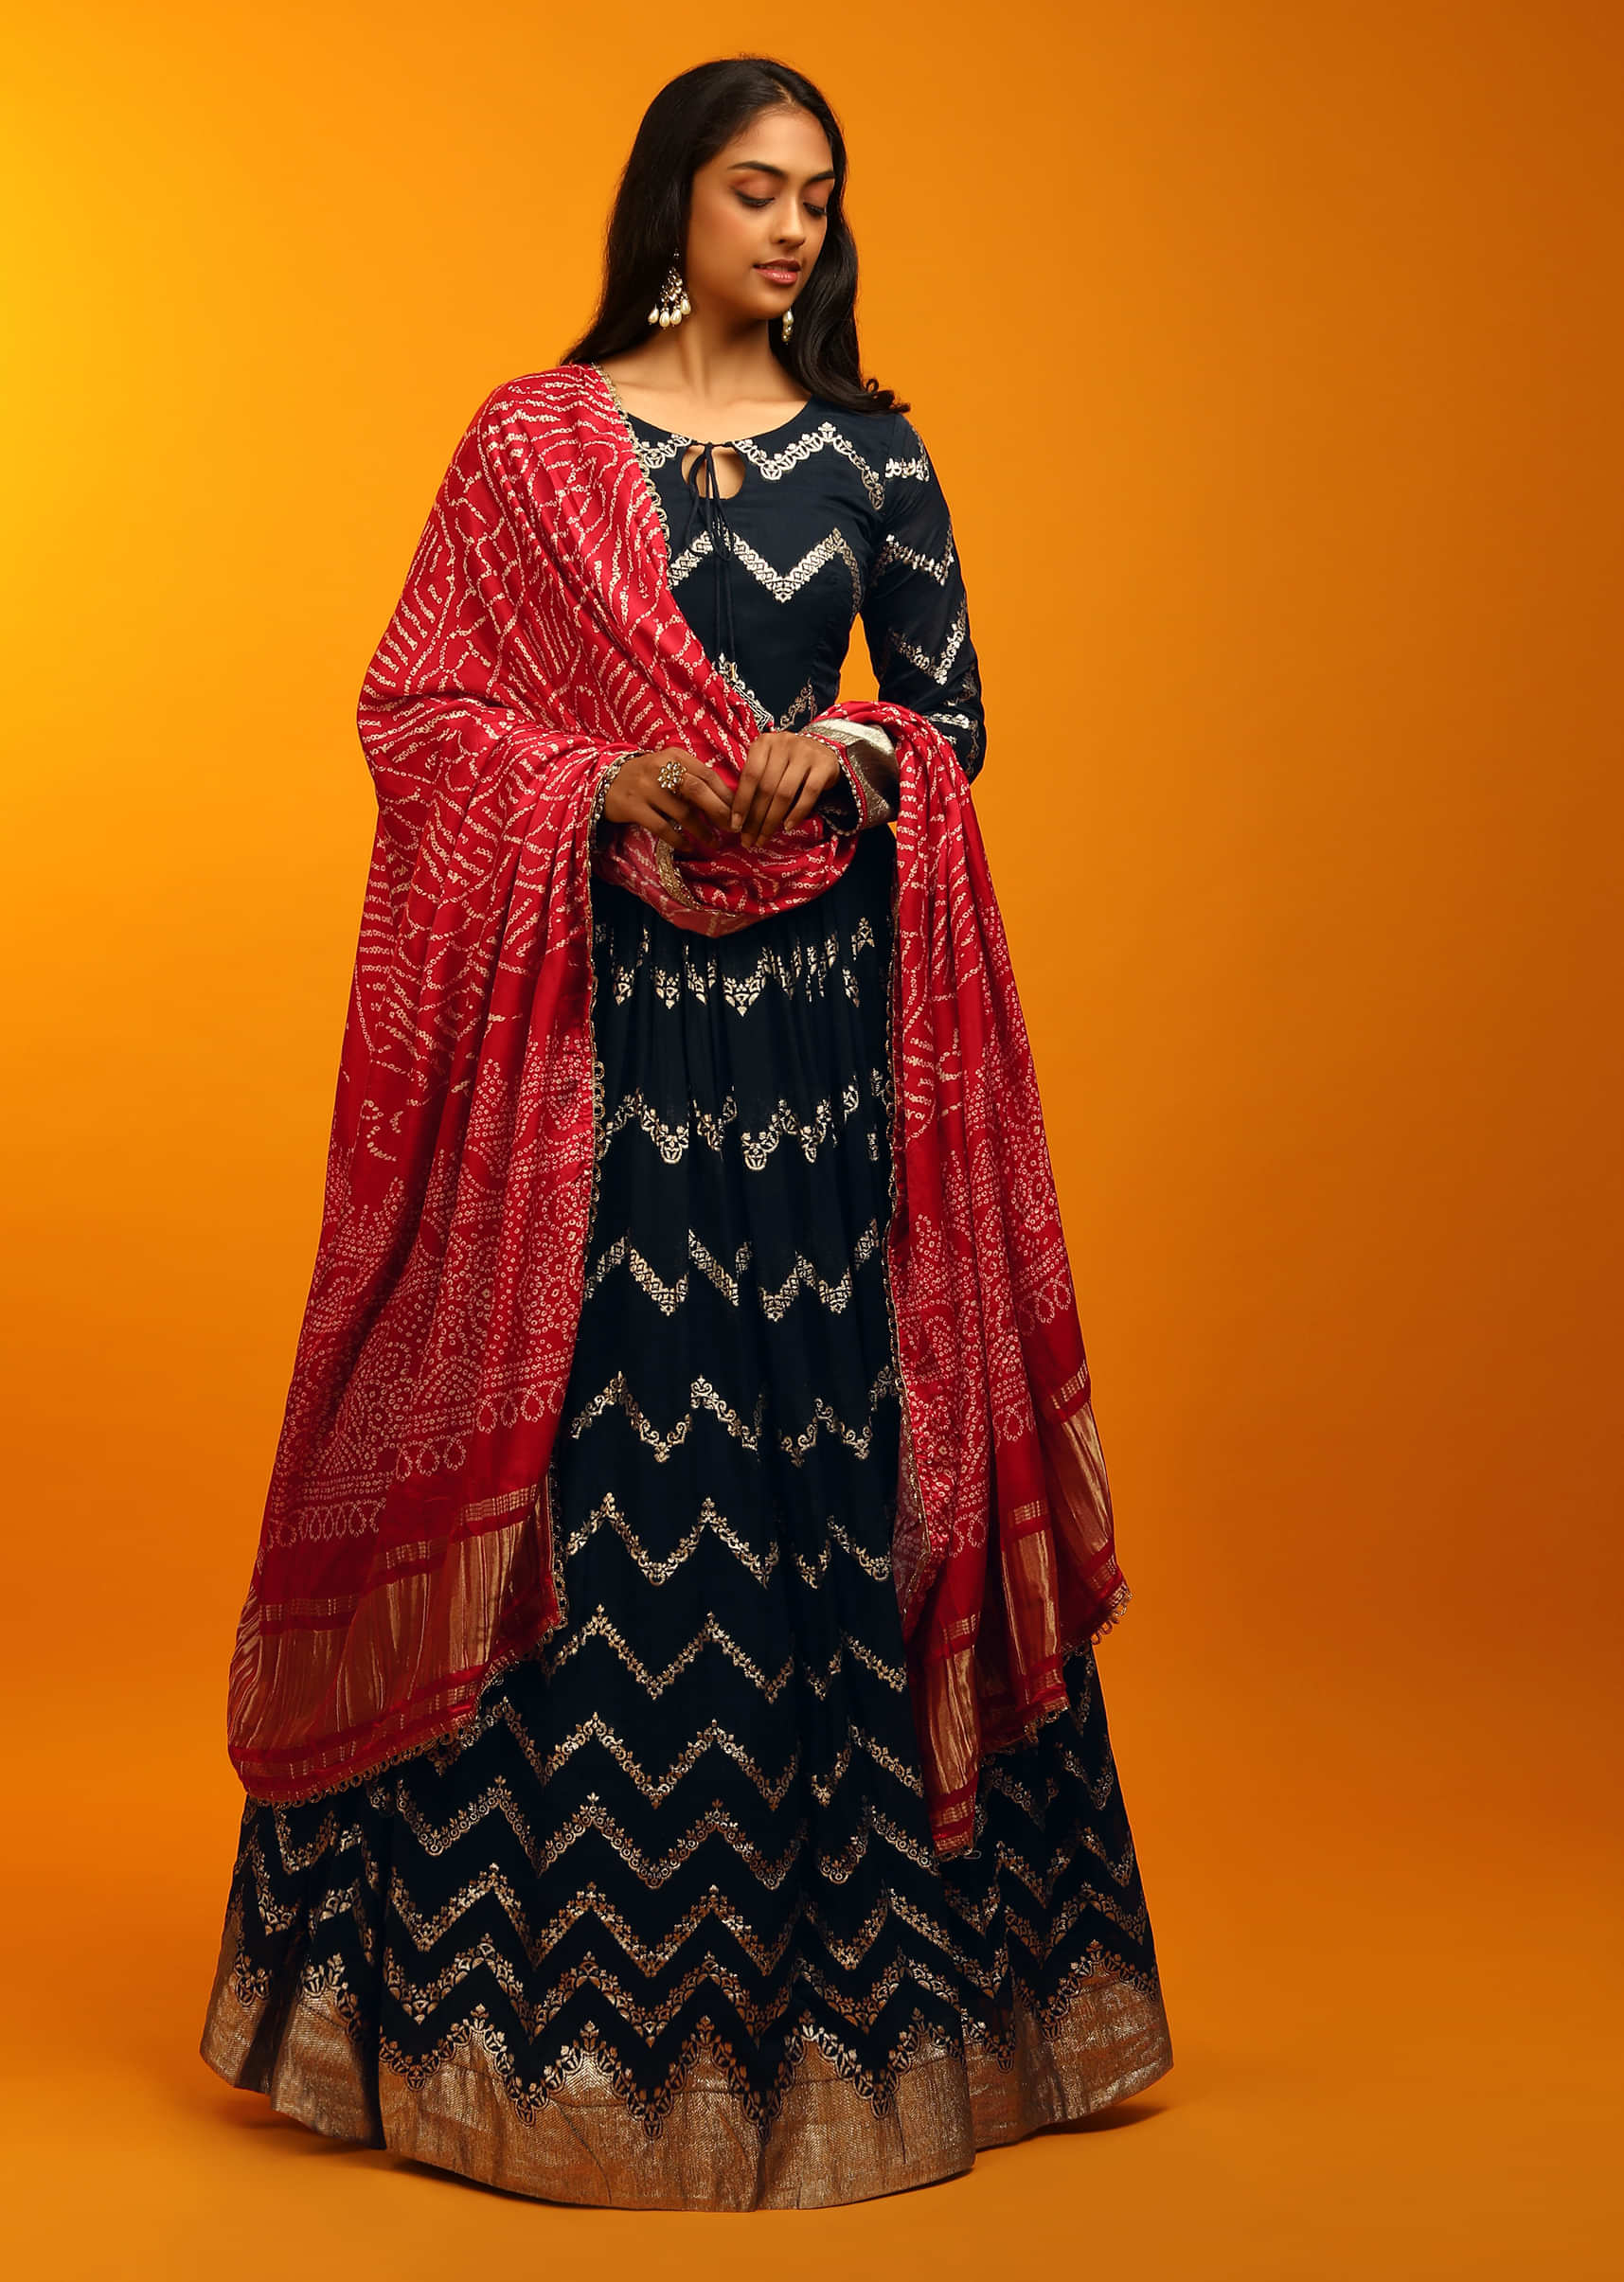 Midnight Blue Anarkali Suit In Brocade Silk With Woven Chevron Design And Red Bandhani Dupatta